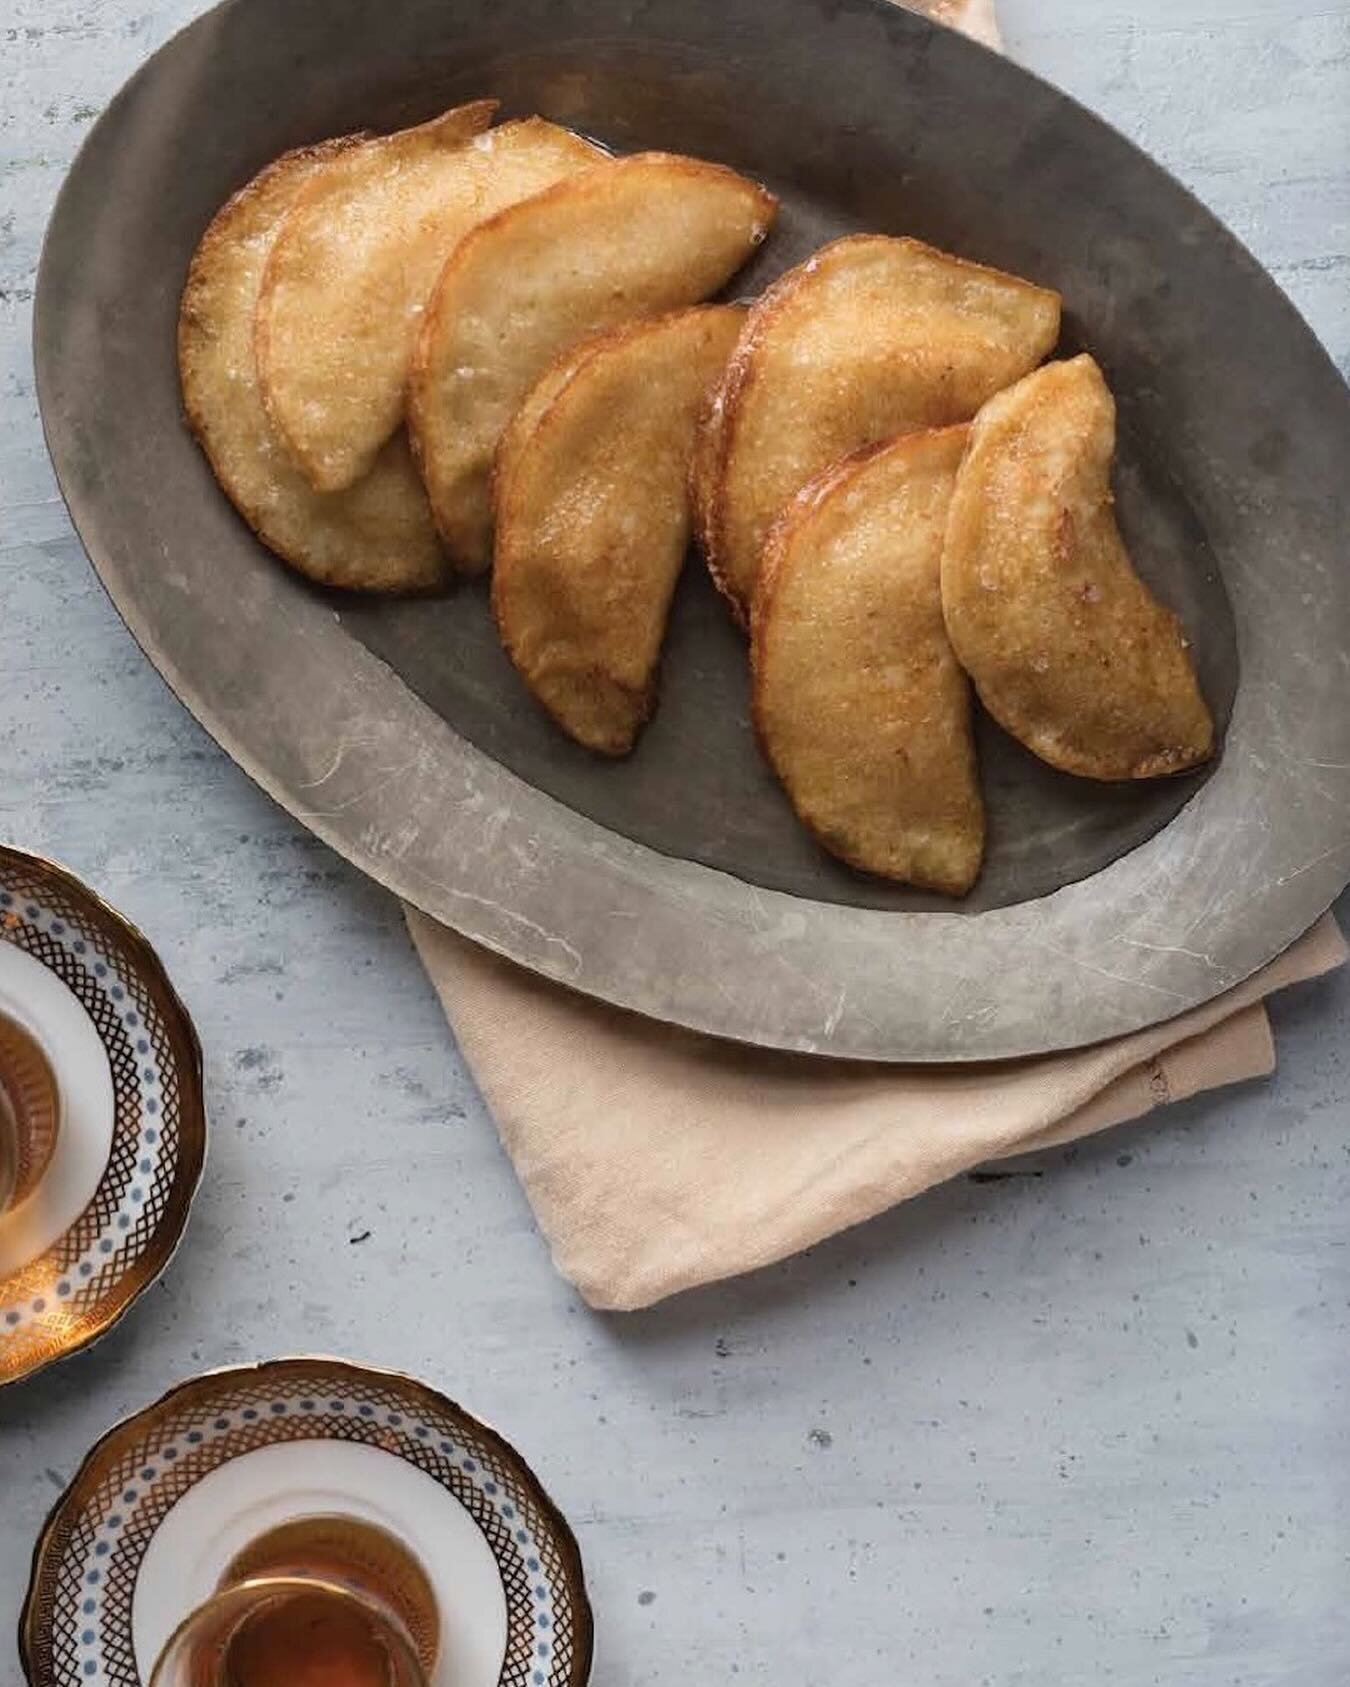 In recognition of the upcoming observance of Ramadan, our Recipe of the Week is for Qatayef, a standardl Middle-Eastern dessert that is especially popular during the holy month. This version has a filling of cheese and cr&egrave;me fra&icirc;che, but